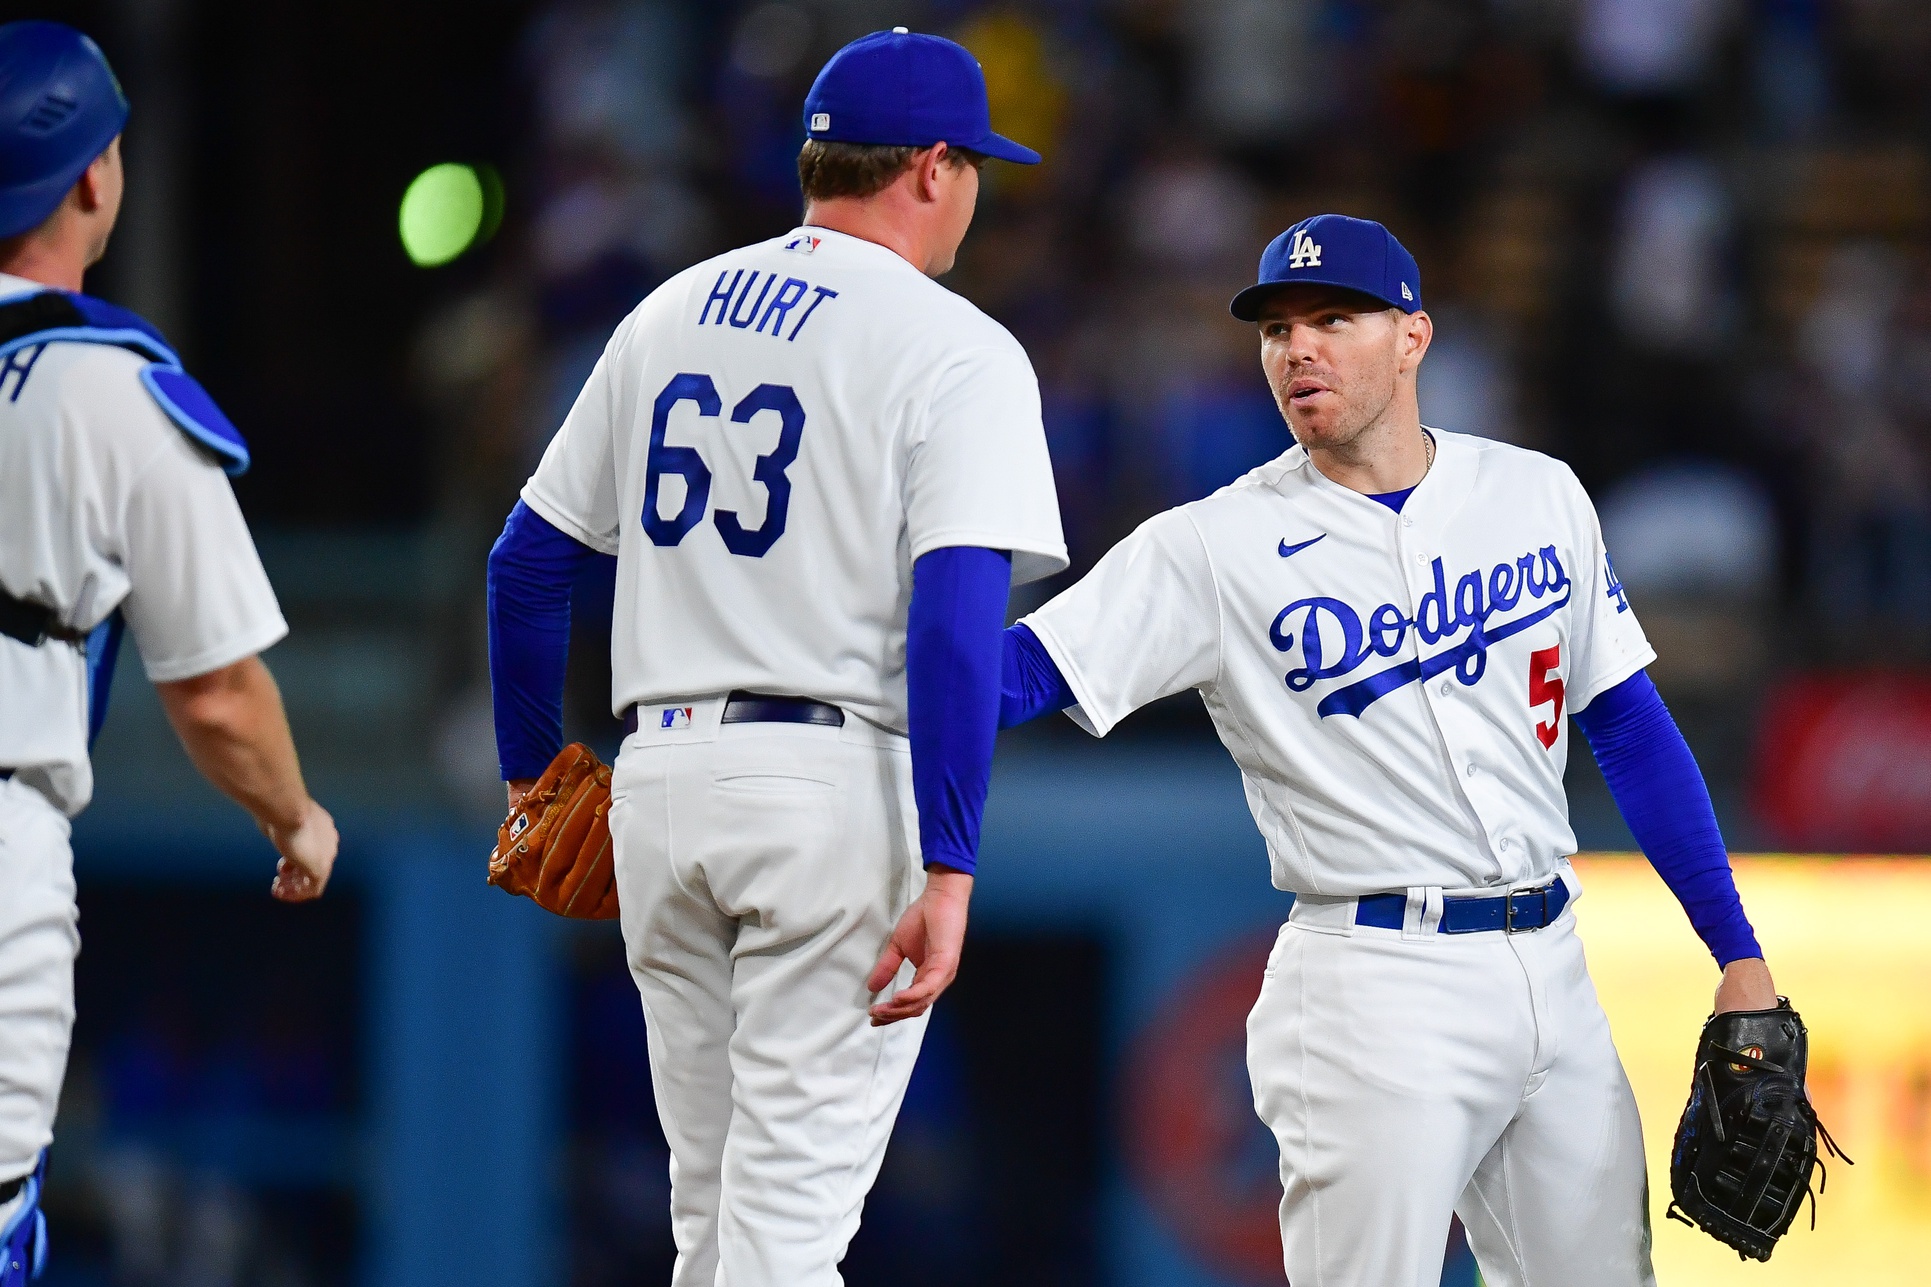 Dodgers News: MLB Insider Predicts Kyle Hurt Plays Big Role in Postseason This Year